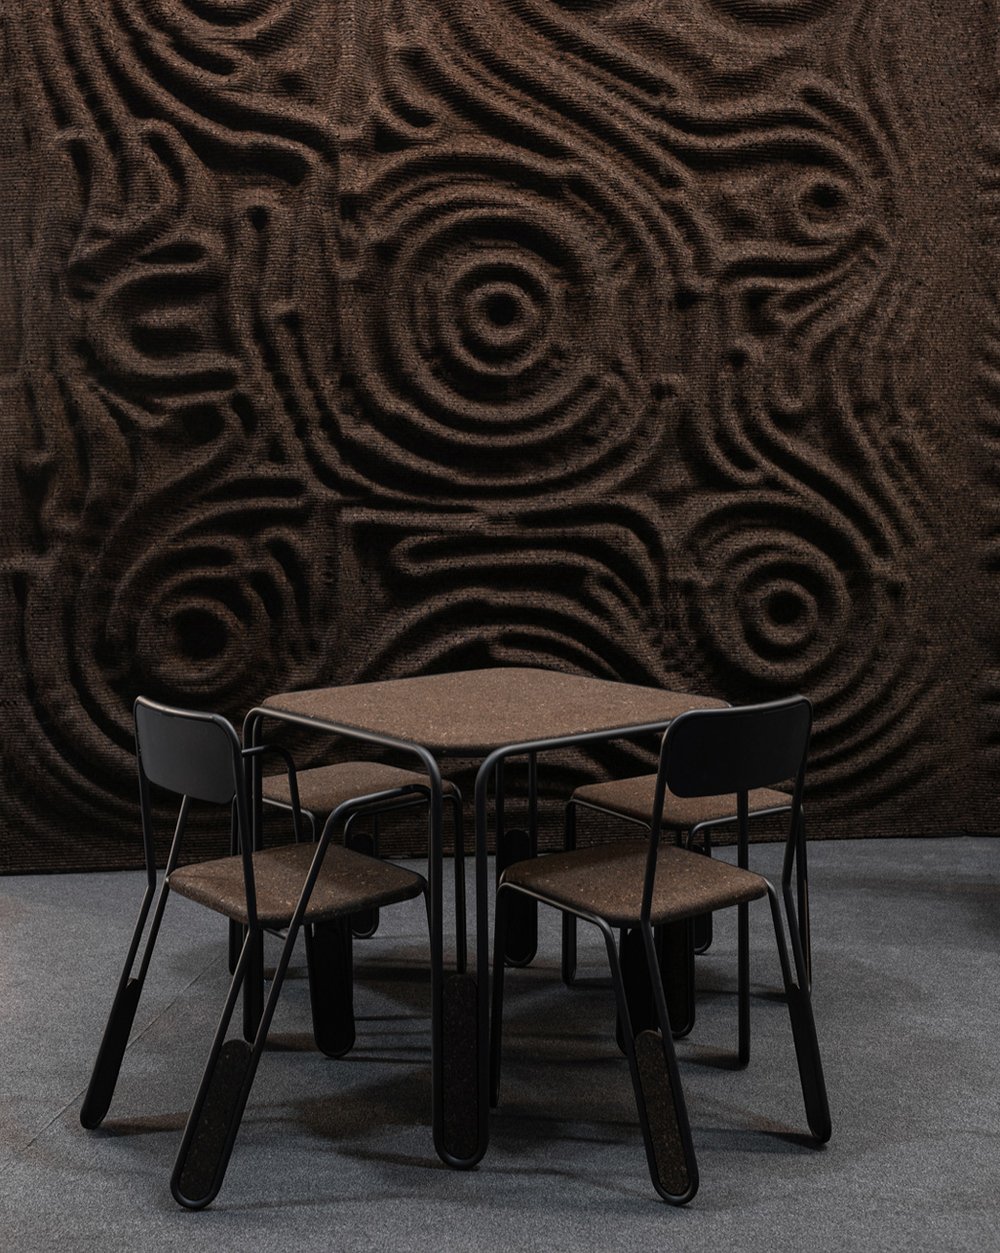 Corkbiomorph by SPECTROOM for Gencork and Falca Chair and Table by Toni Grilo for Blackcork (Image: Pedro Machado)